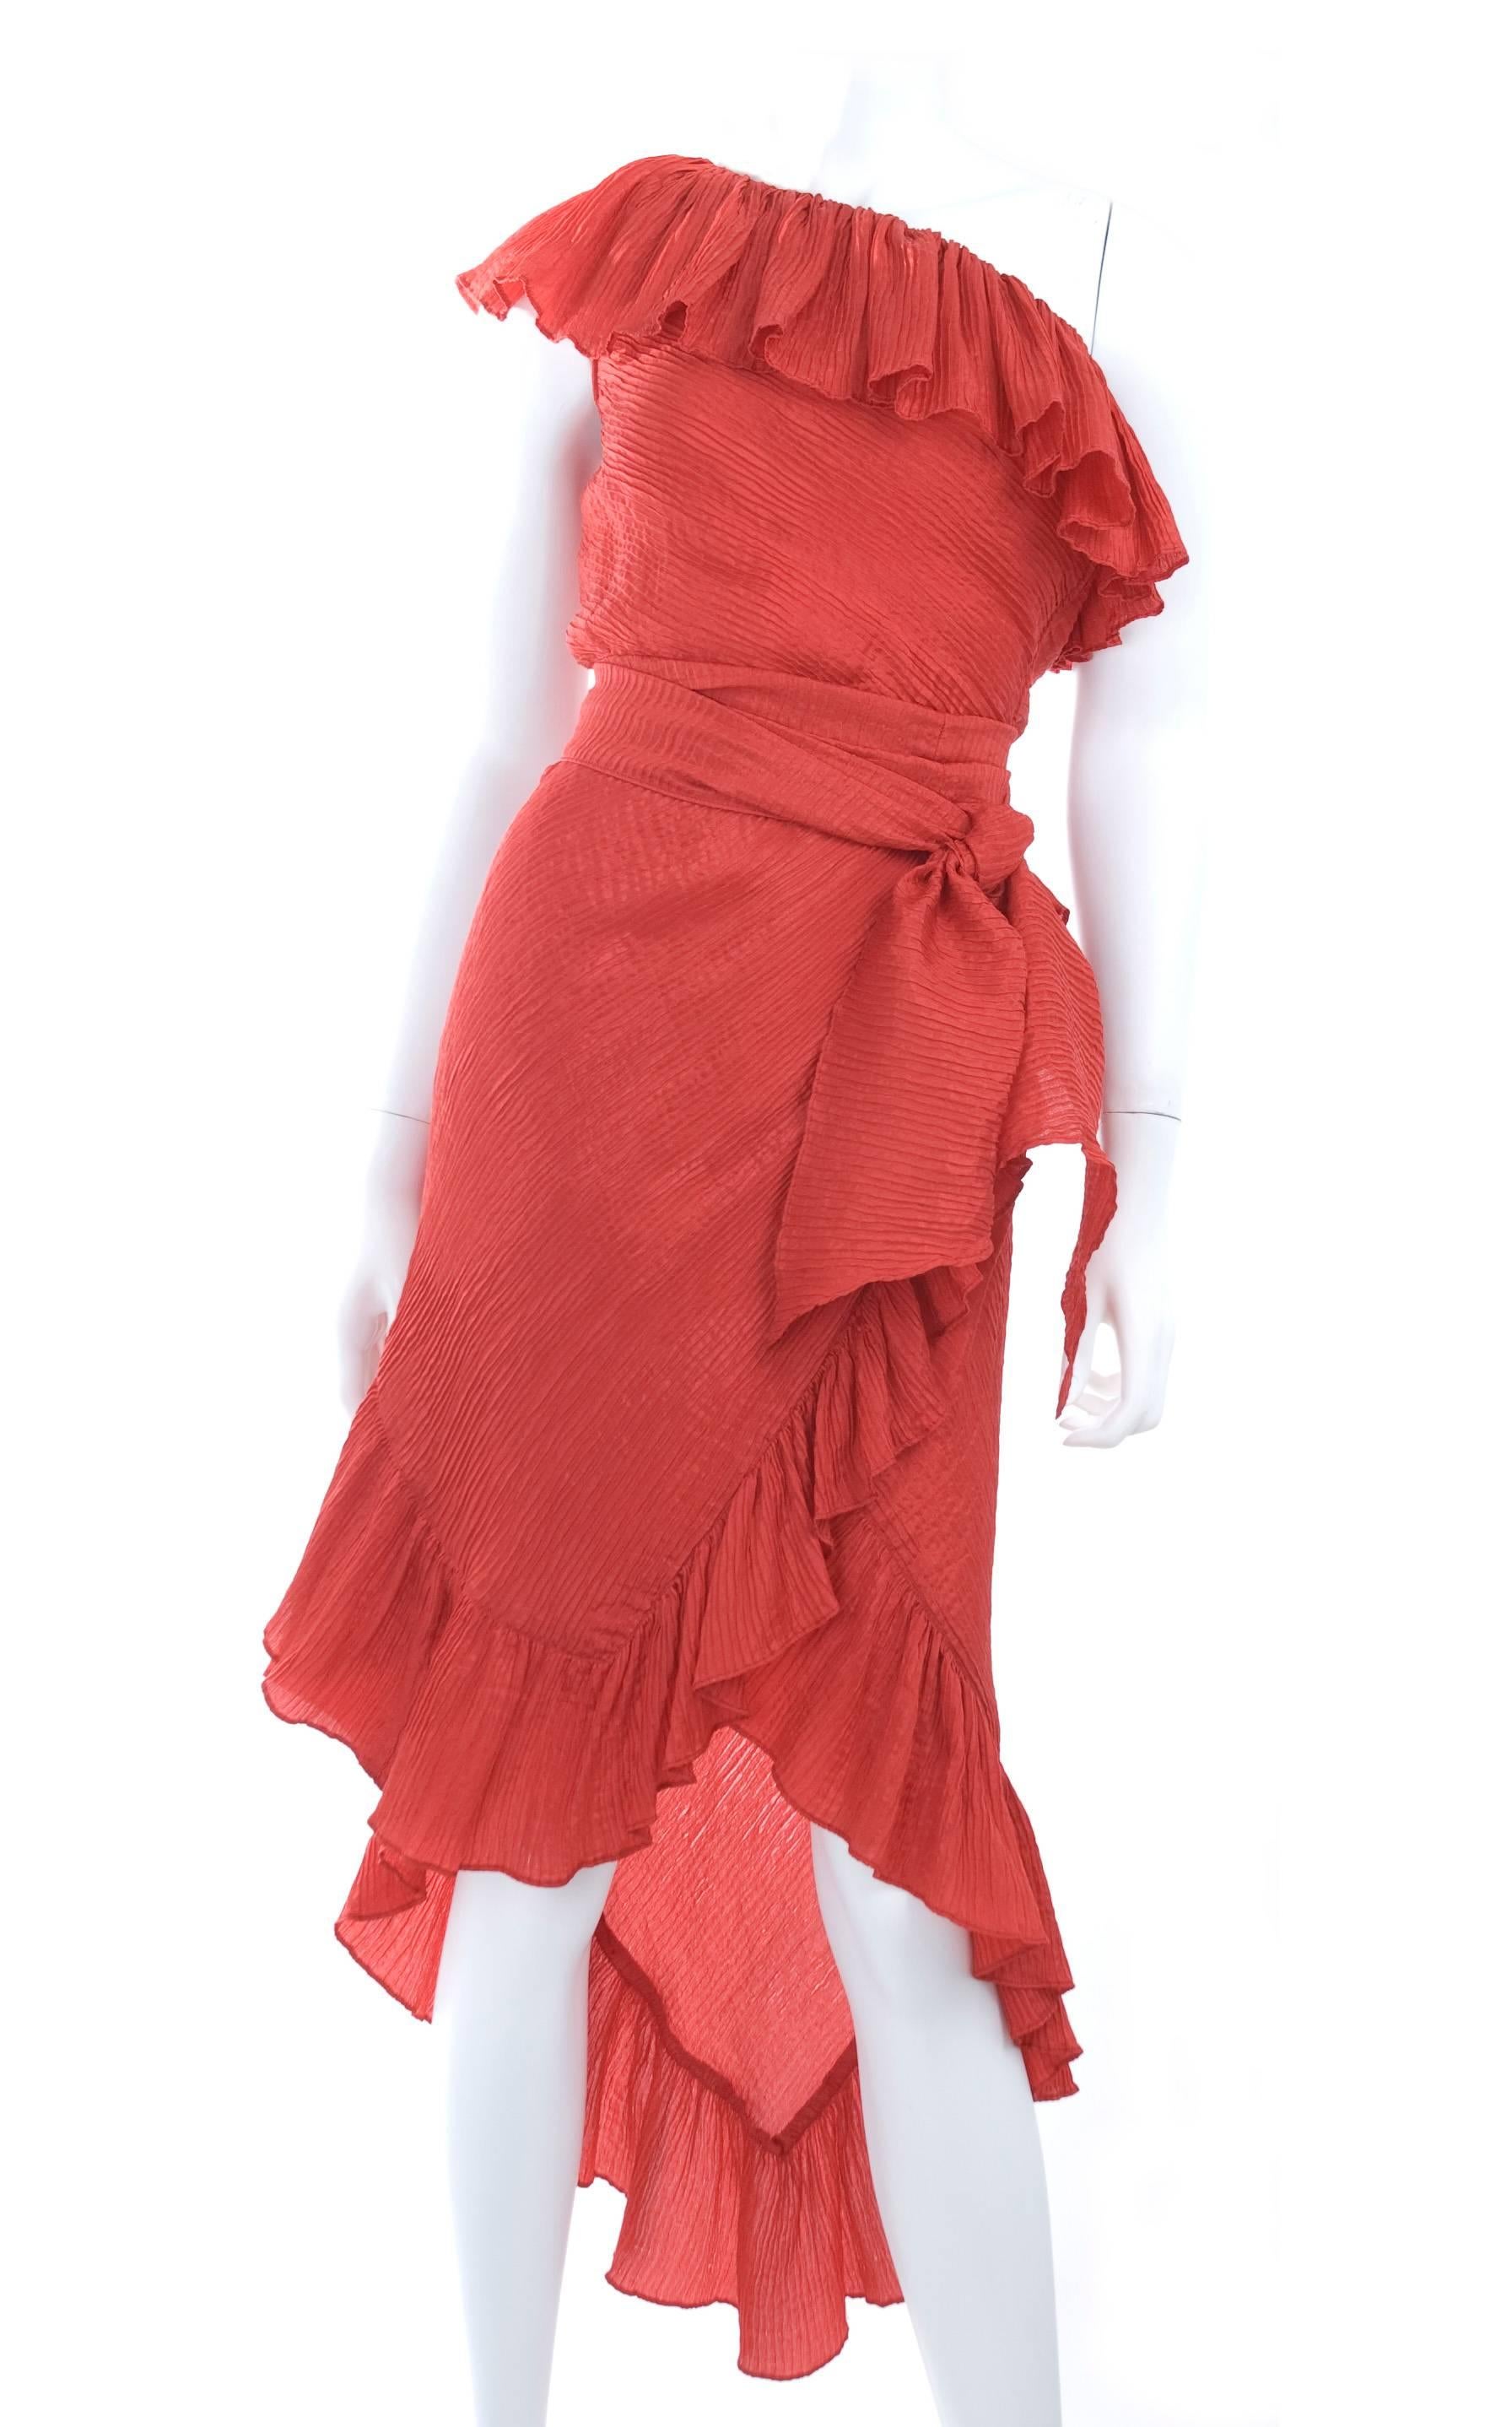 Vintage Yves Saint Laurent Cocktaildress in Red and Asymmetrical Hemline For Sale 2